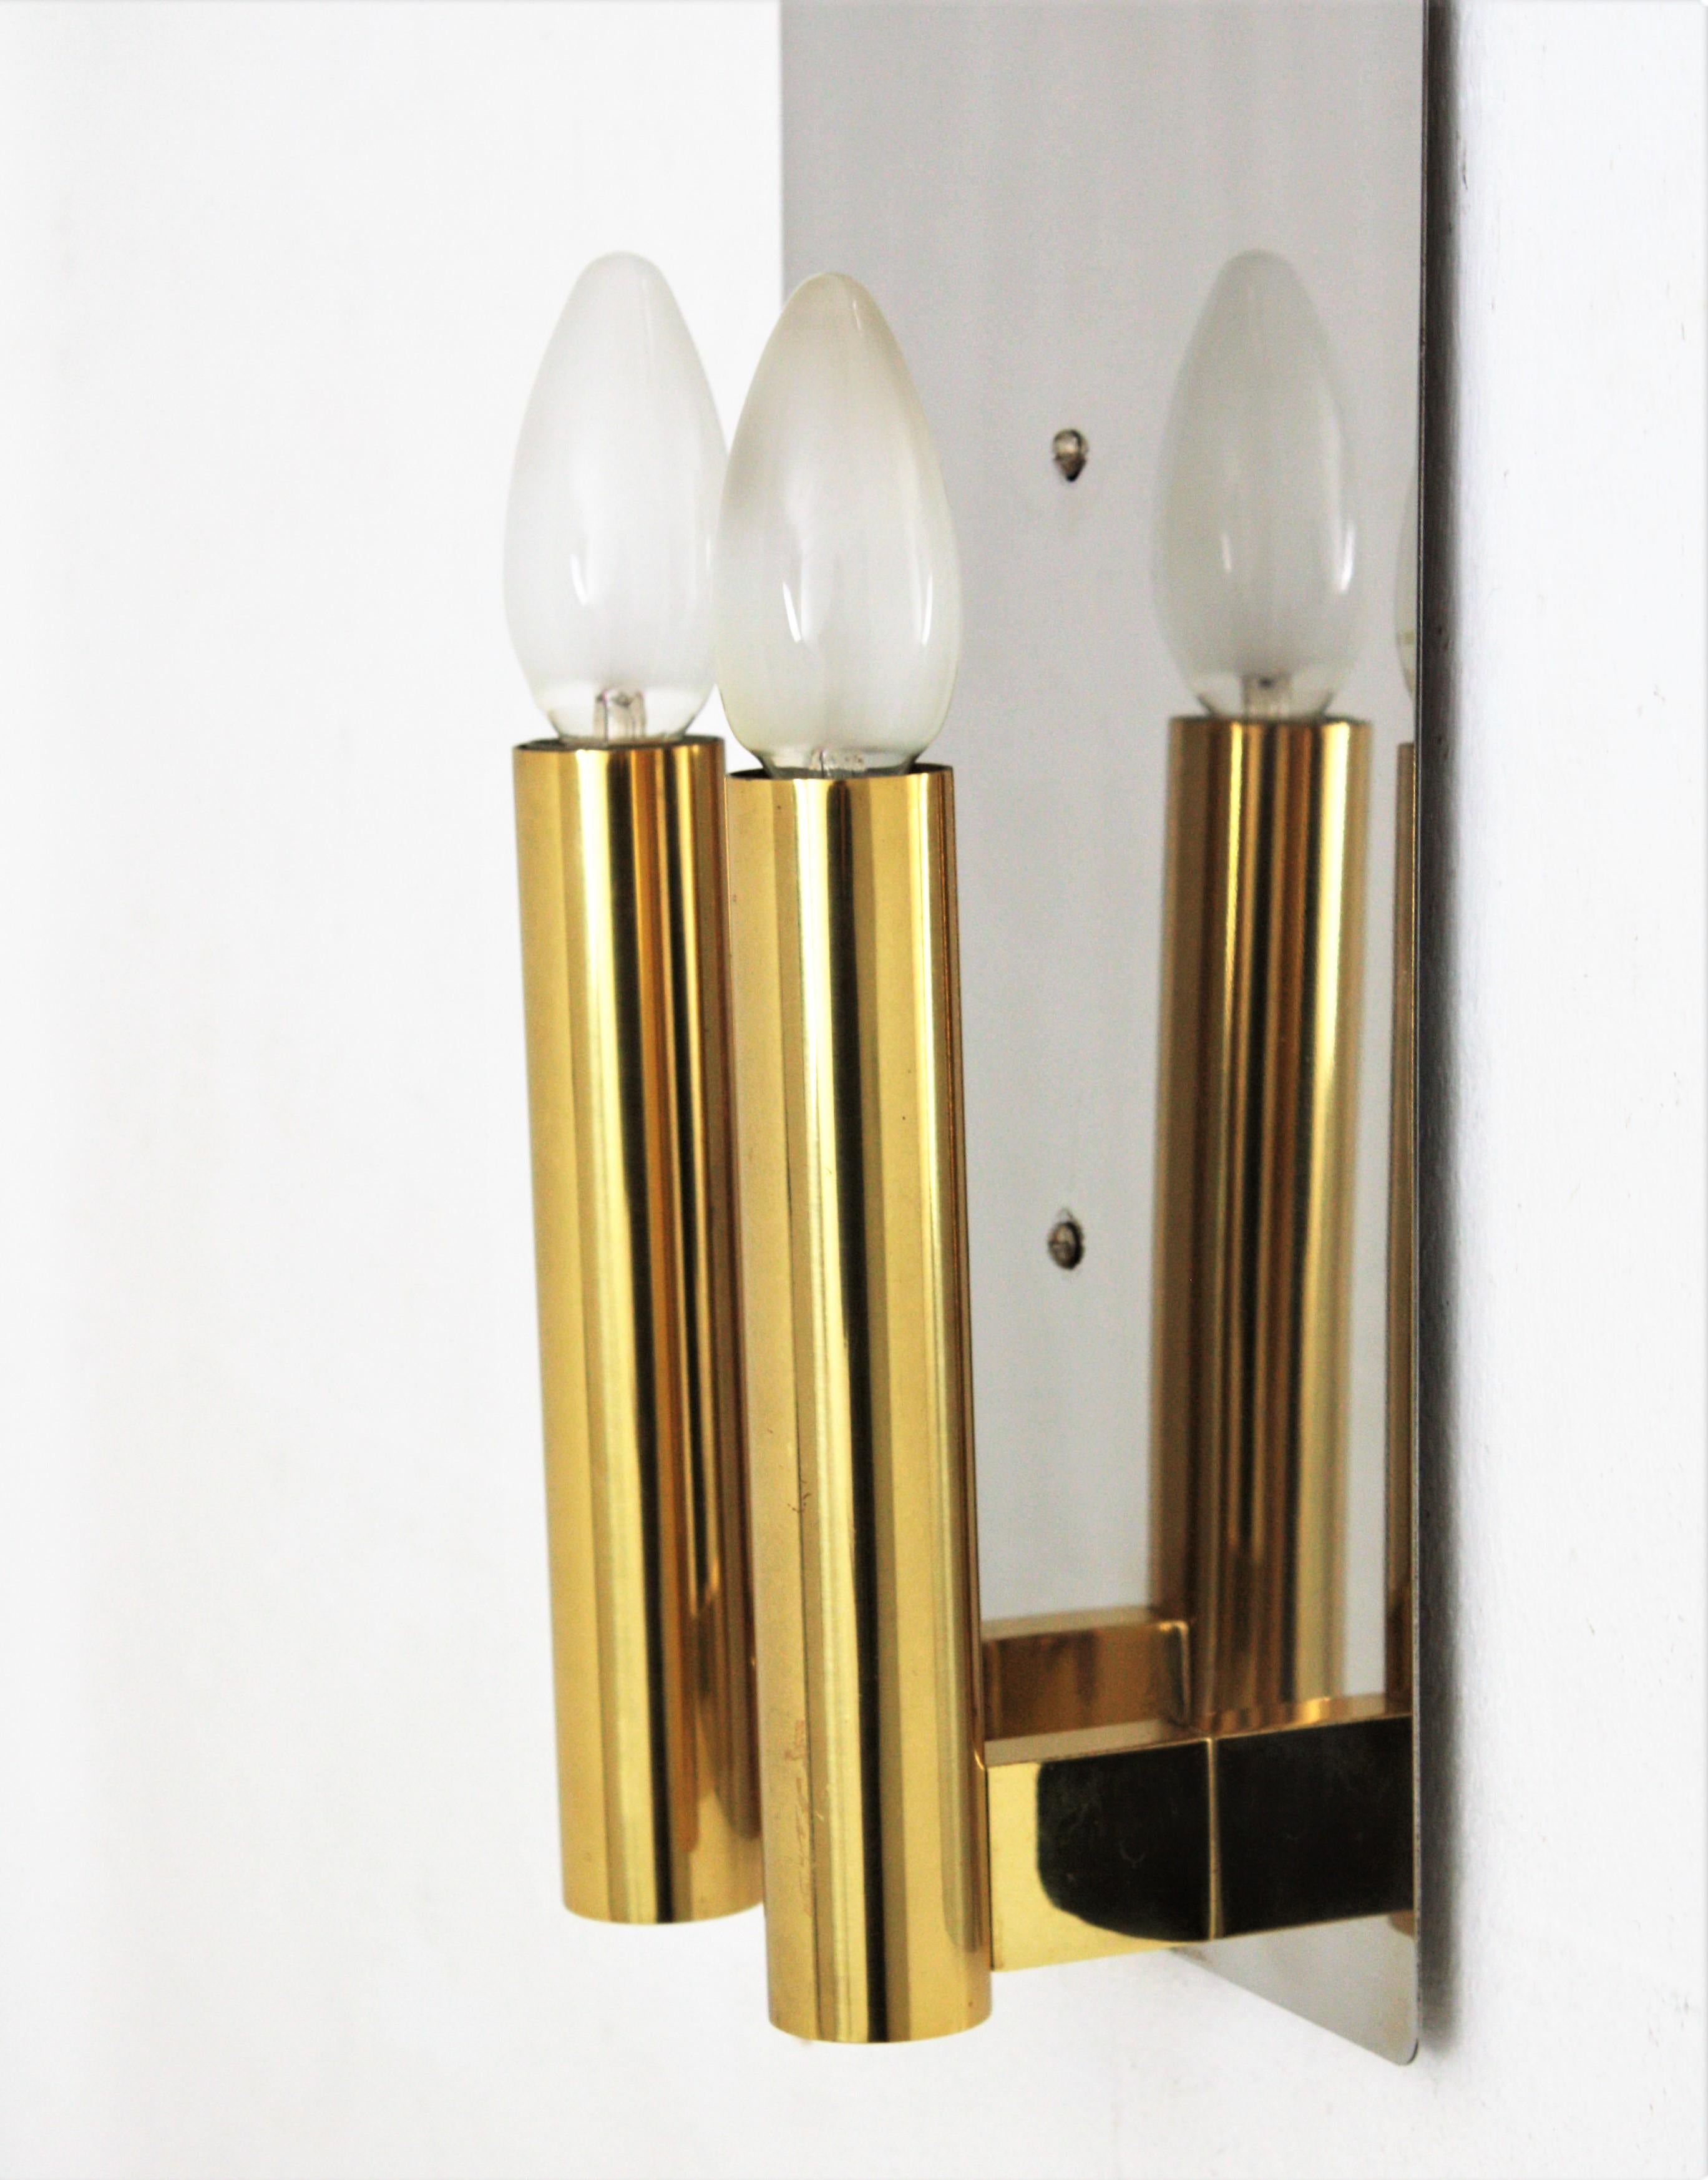 Sciolari Wall Sconce in Brass and Steel, Italy, 1960s For Sale 2